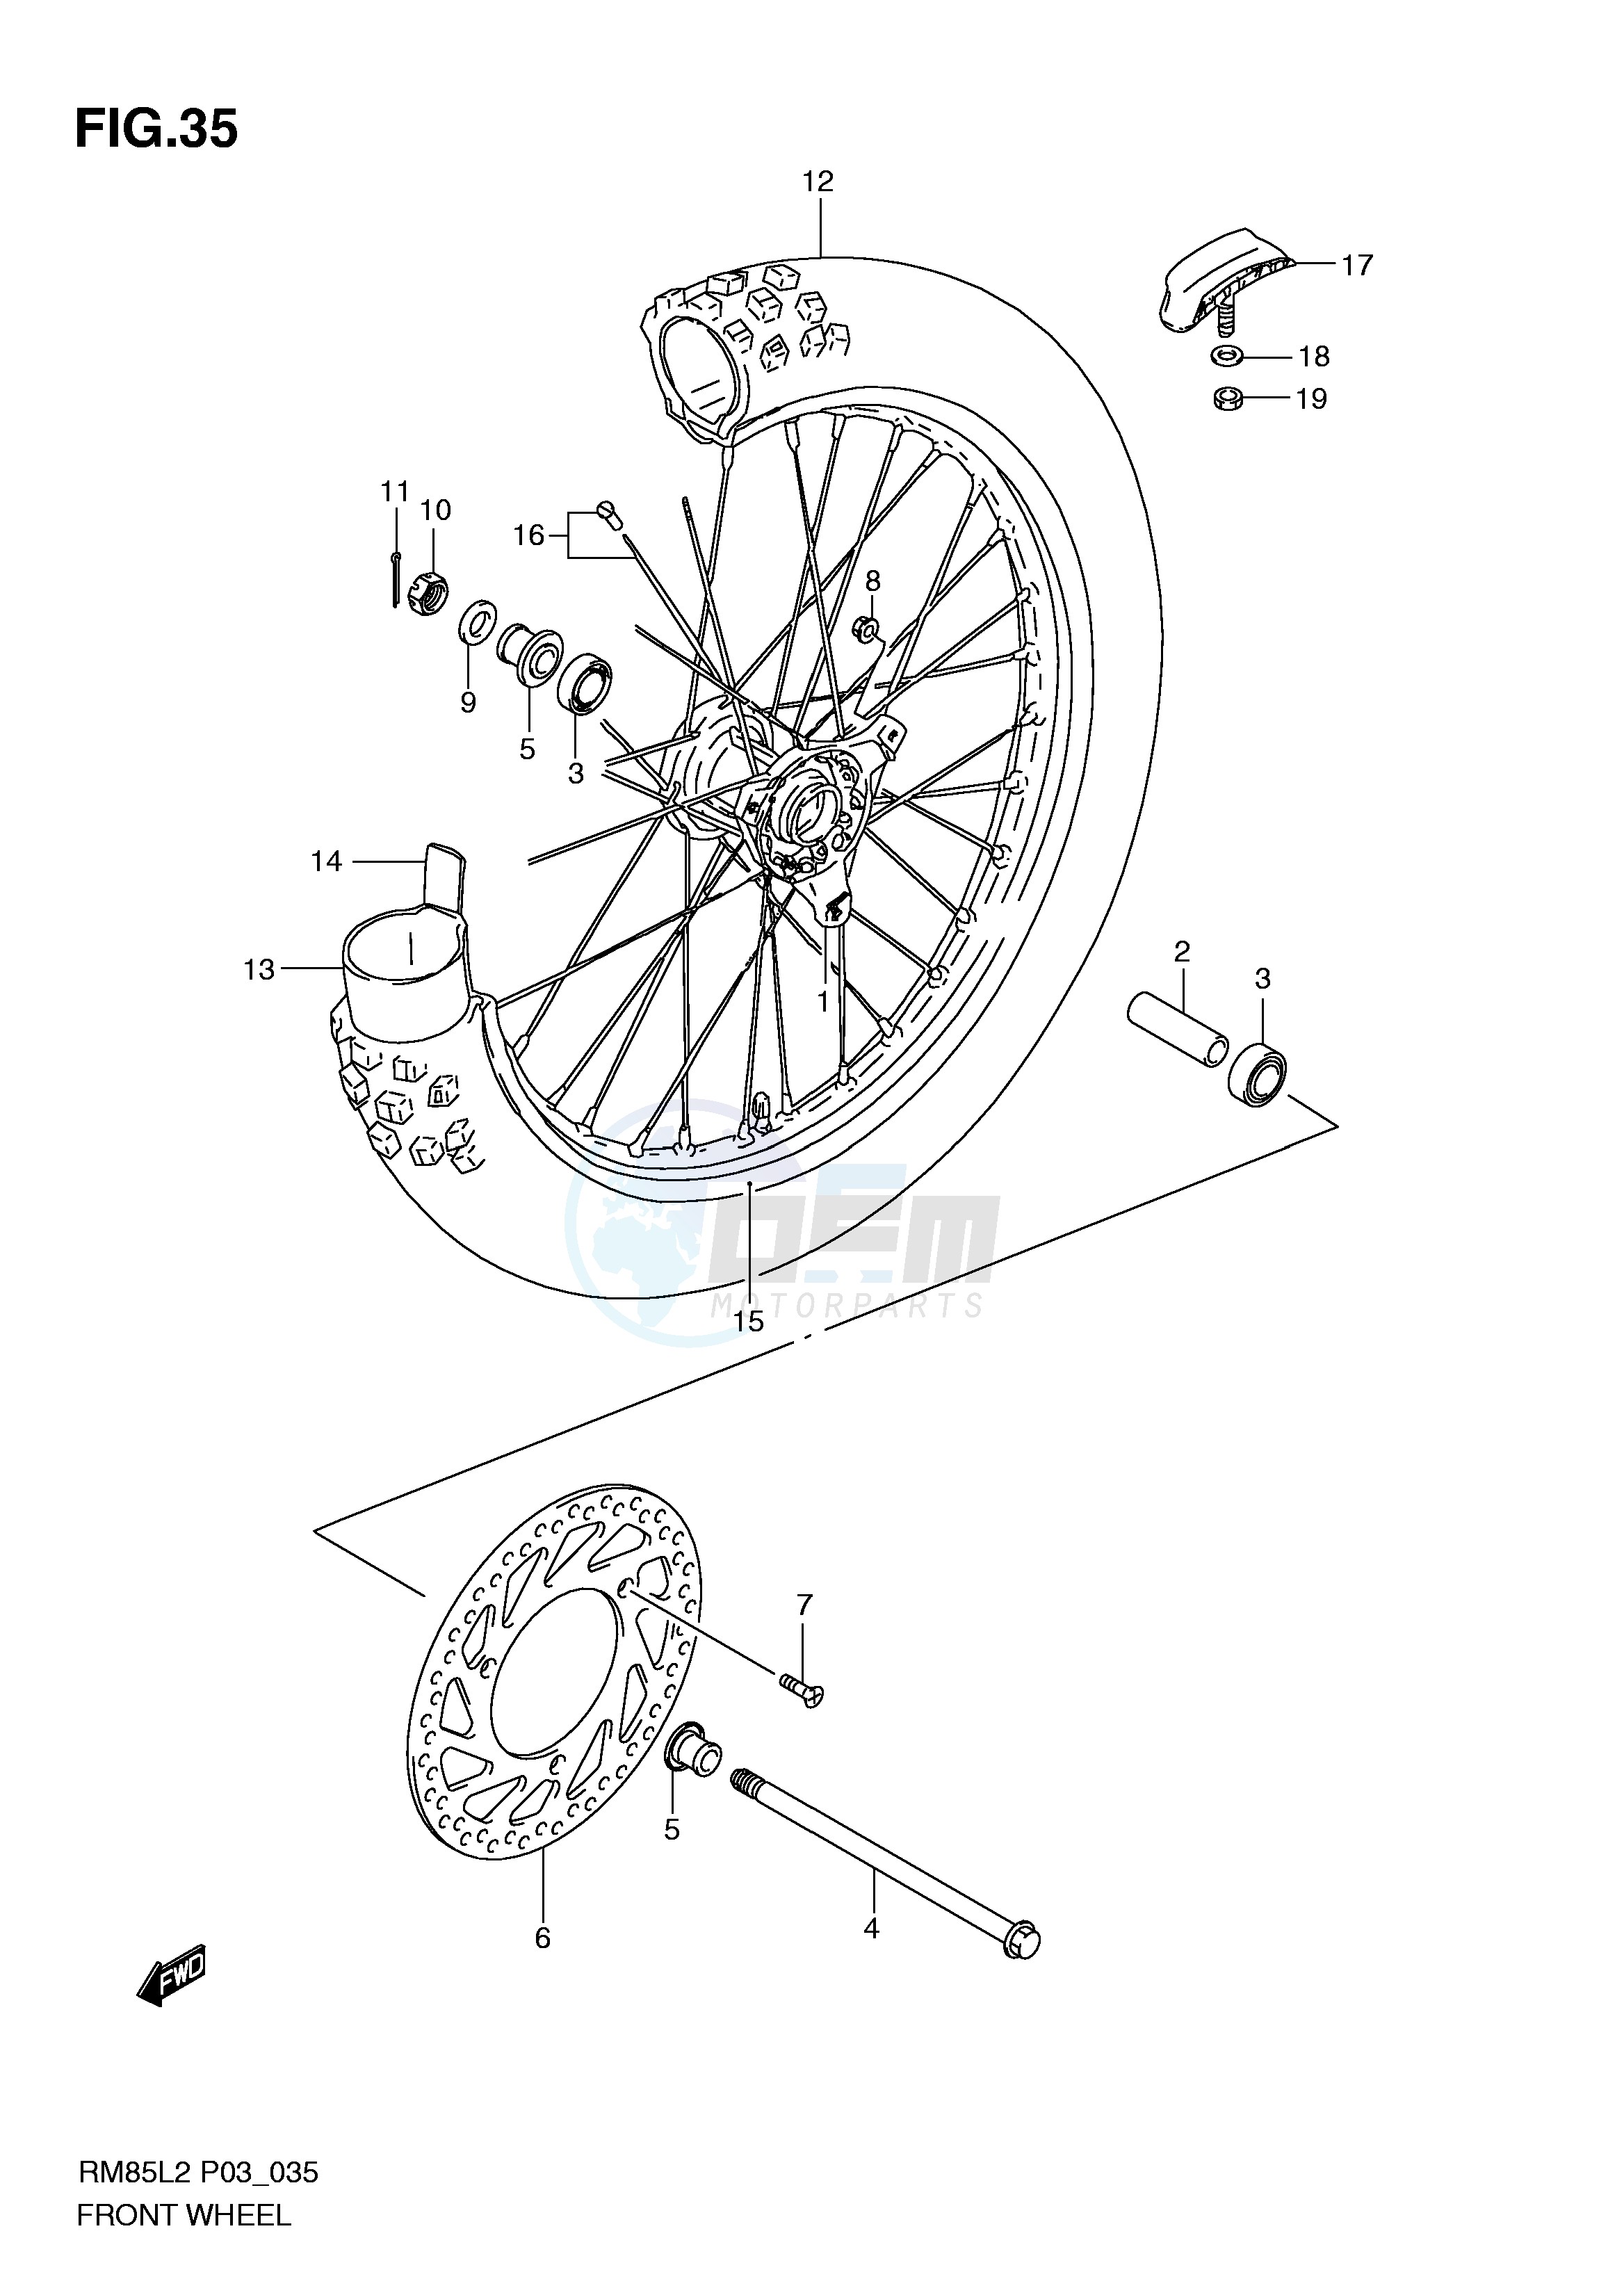 FRONT WHEEL (RM85LL2 P03) image